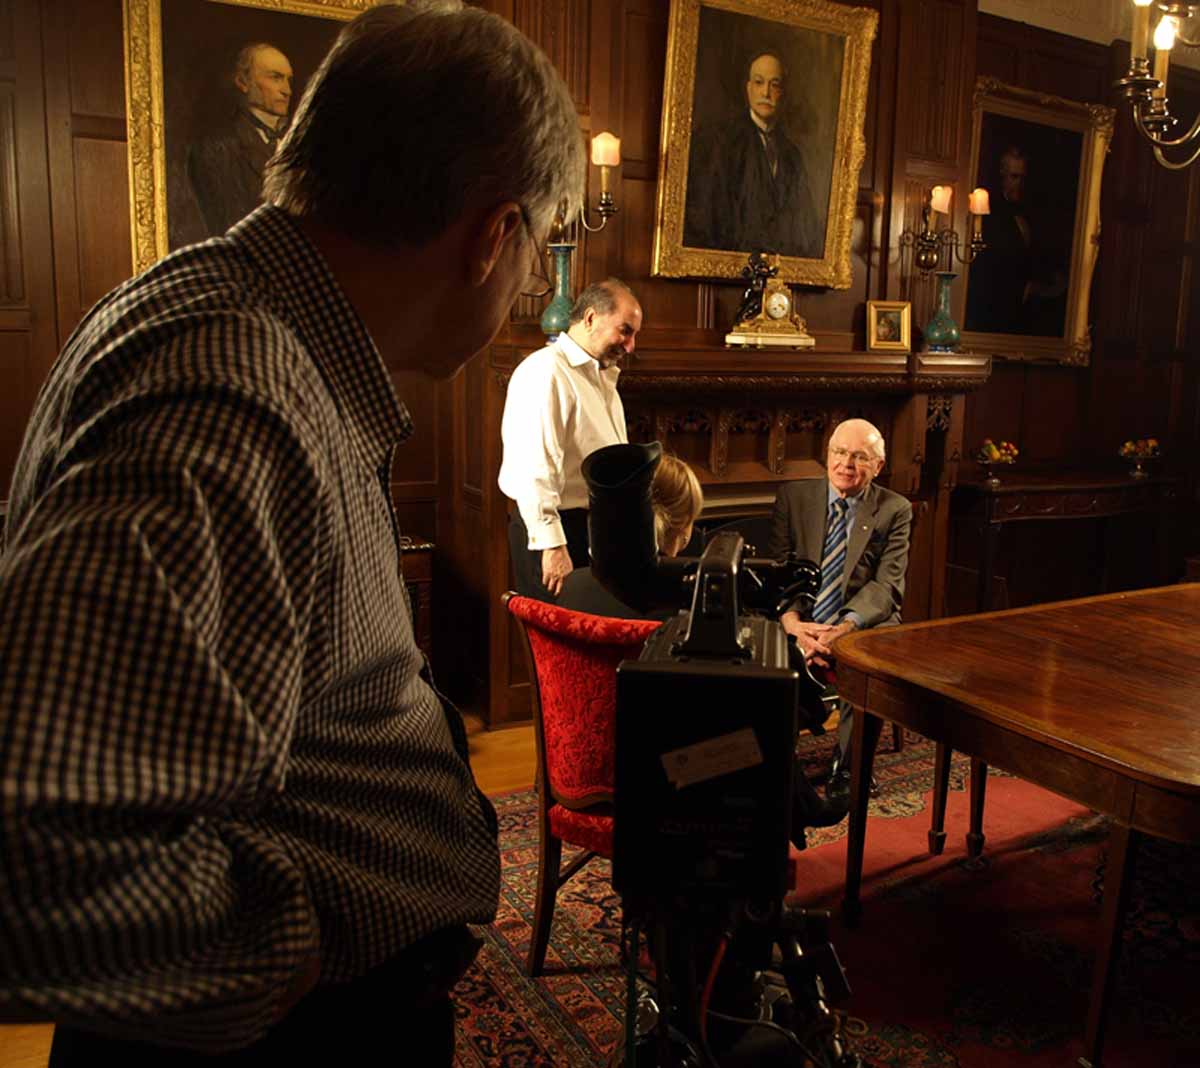 Firdaus Kharas directing a documentary on the Nobel Prize-nominee Douglas Roche